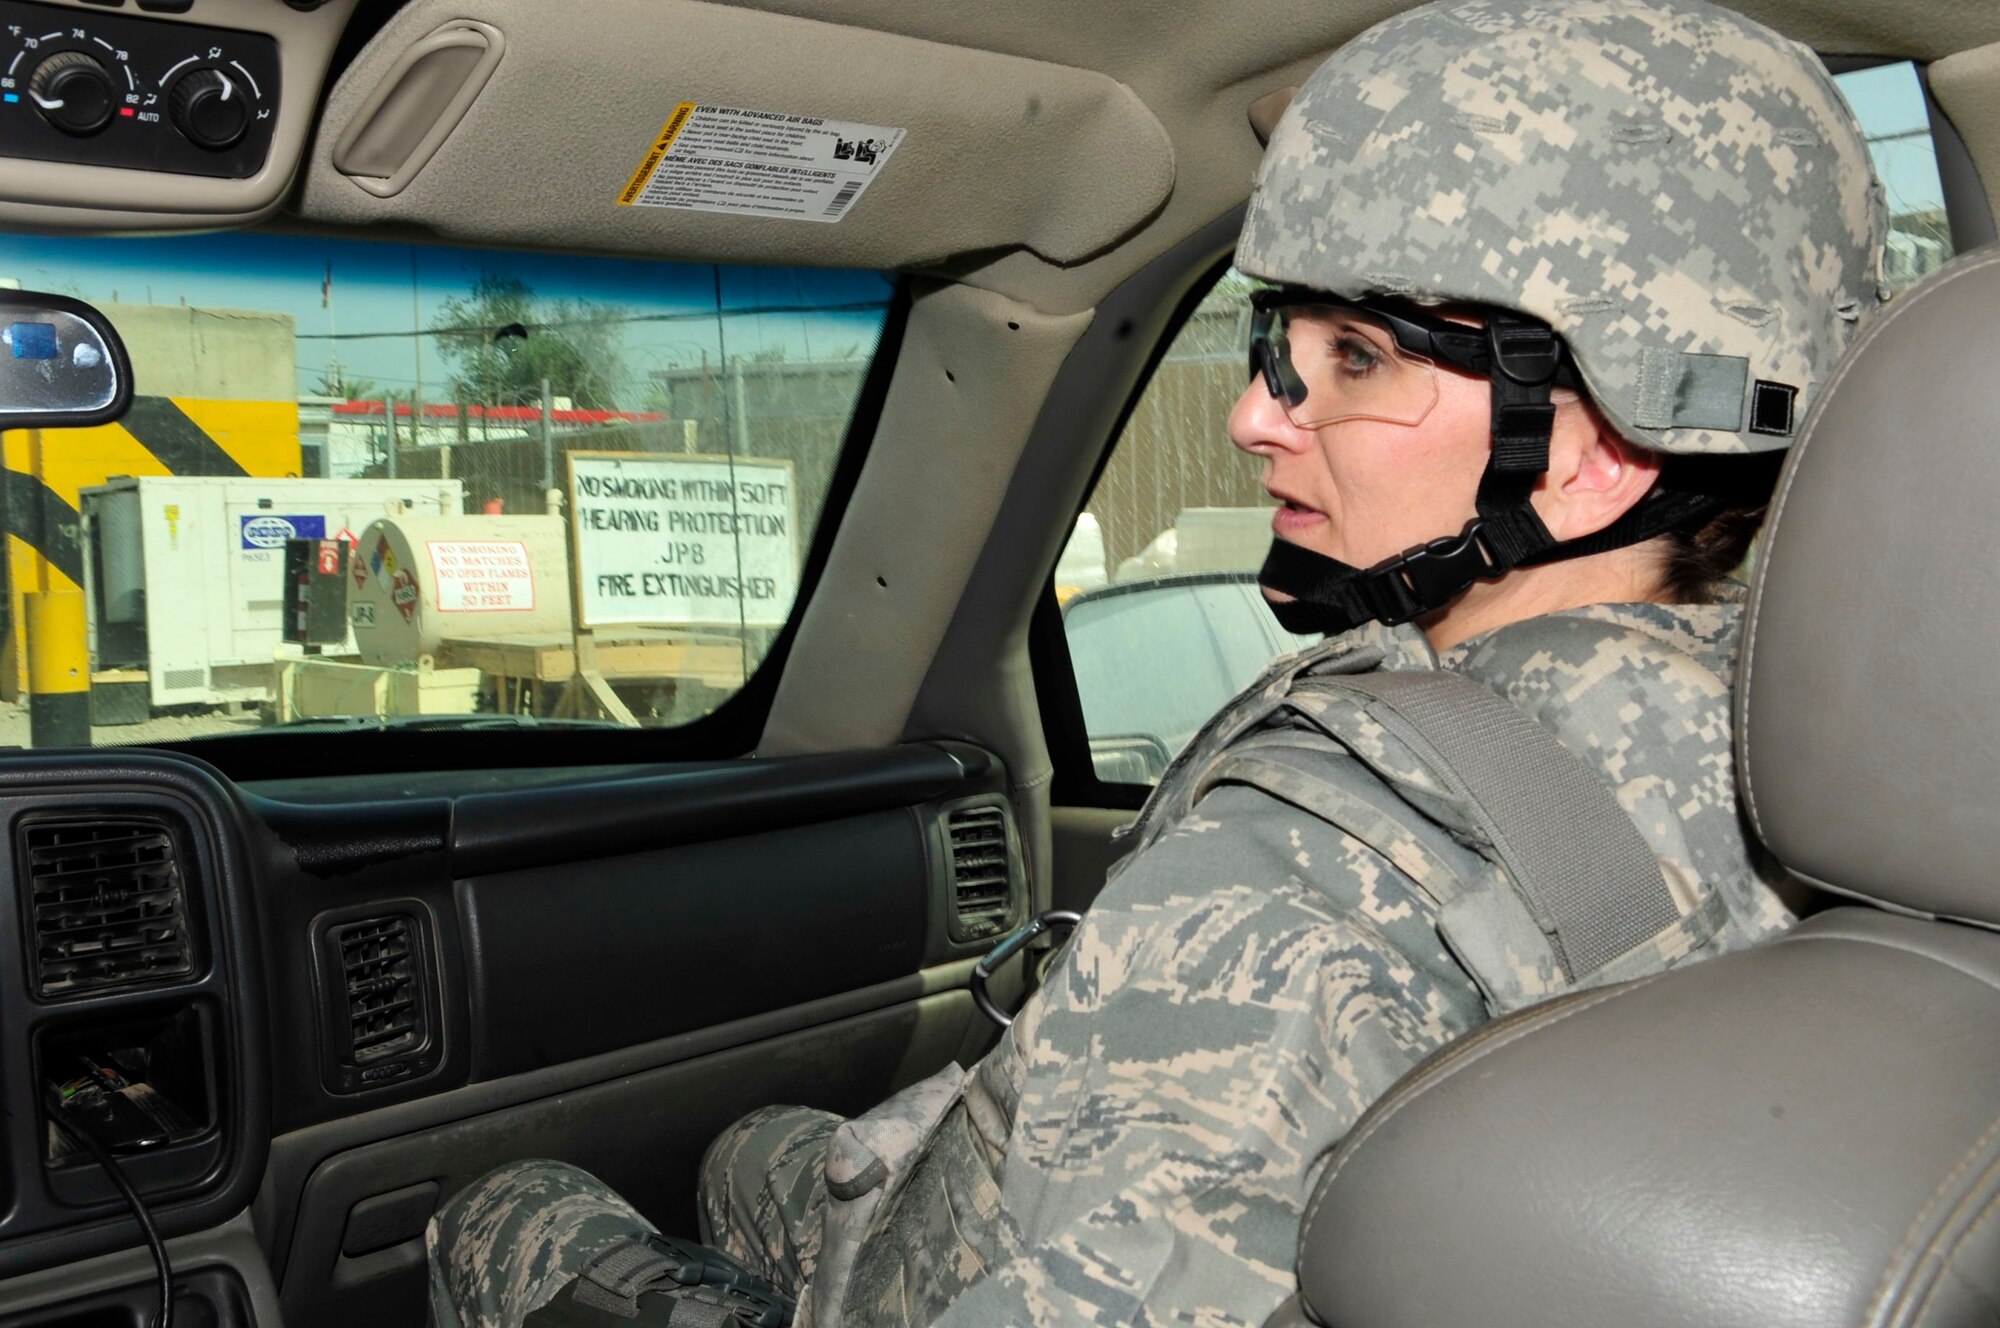 U.S. Air Force Lt. Col. Kaylin Haywood Zapata, Edmond, Okla., native and an Iraq Training and Advisory Mission – Police oil and electric police advisor, rides in an armored SUV while in a convoy to the Rusafa Prison Complex, Baghdad, Iraq, April 6, 2011. She is helping assess the conditions at a women’s prison as a member of the corrections assistance transition team. (U.S. Air Force photo by Senior Master Sgt. Larry A. Schneck/Released)